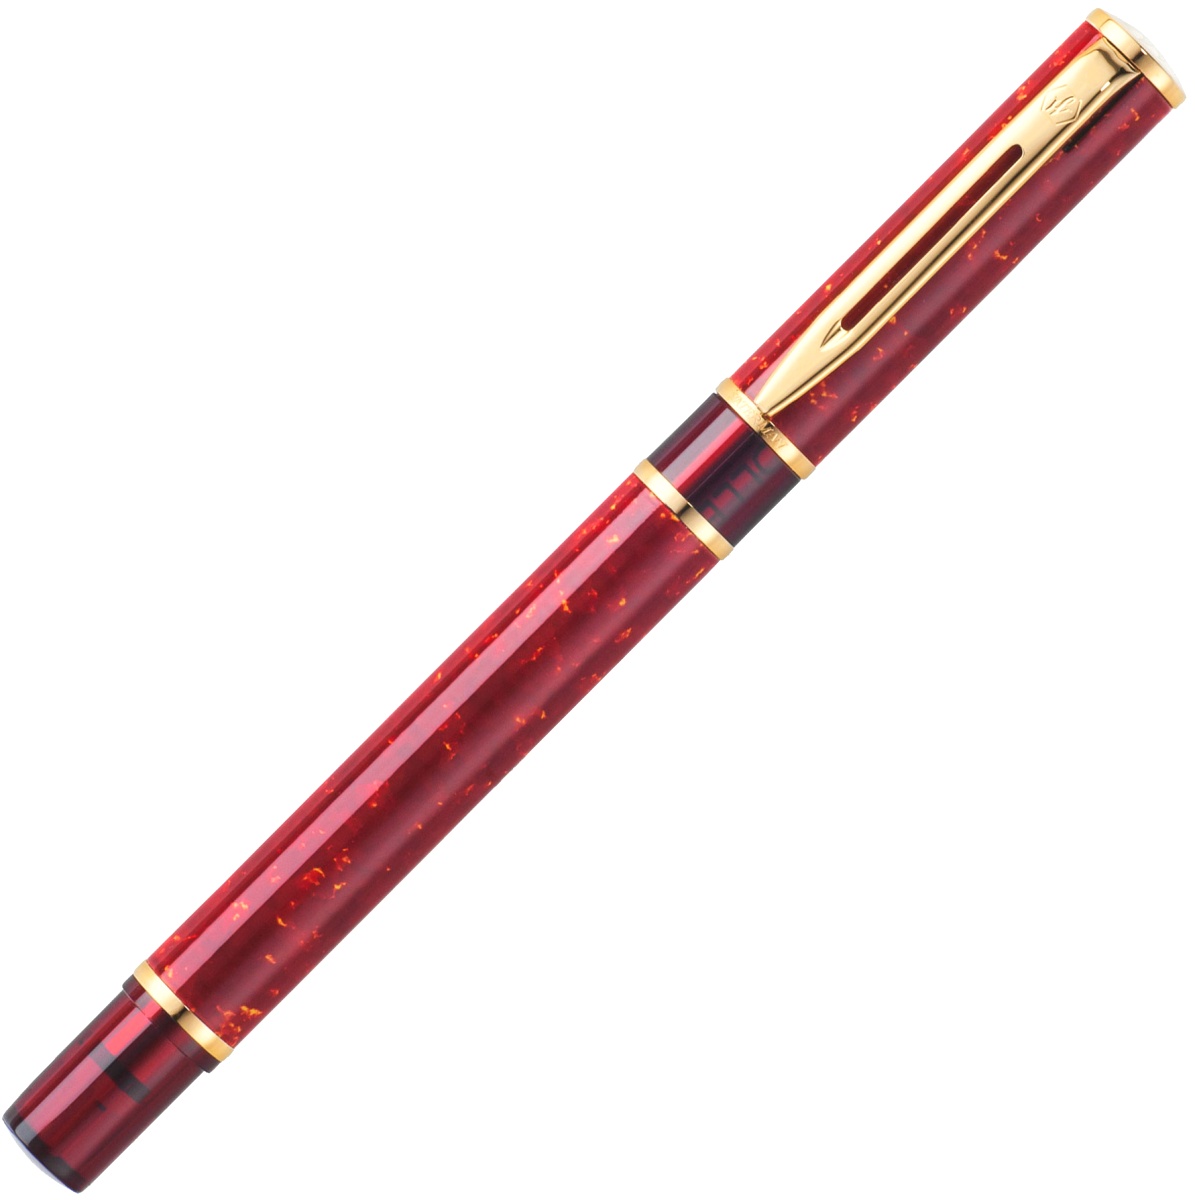  Ручка-роллер Waterman Laureat, Lacquer Red Safran GT, фото 2